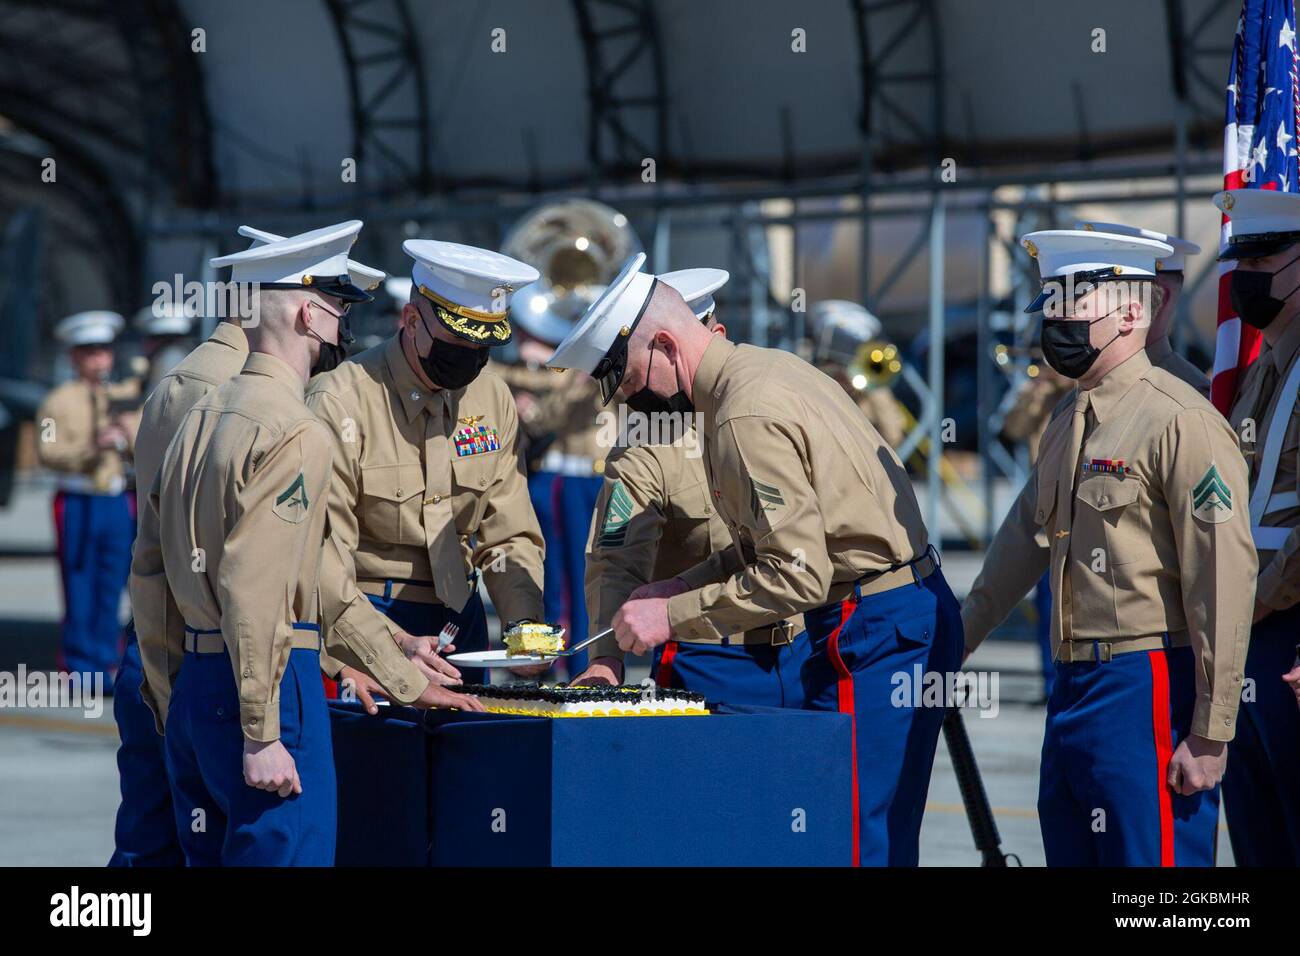 U.S. Marines cut a cake during a ceremony at Marine Corps Air Station Cherry Point, North Carolina, March 5, 2021. The Marines of Marine Attack Squadron (VMA) 542 celebrated the 77th anniversary of their squadron being formed with a ceremony that focused on the squadron’s history as well as rededicating each Marine to service to the United States. VMA-542 was established during World War 2 and has seen service in each major conflict the United States has taken part in to include counter-insurgency operations in Iraq and Afghanistan and more recently against ISIS. The squadron will be deactivat Stock Photo